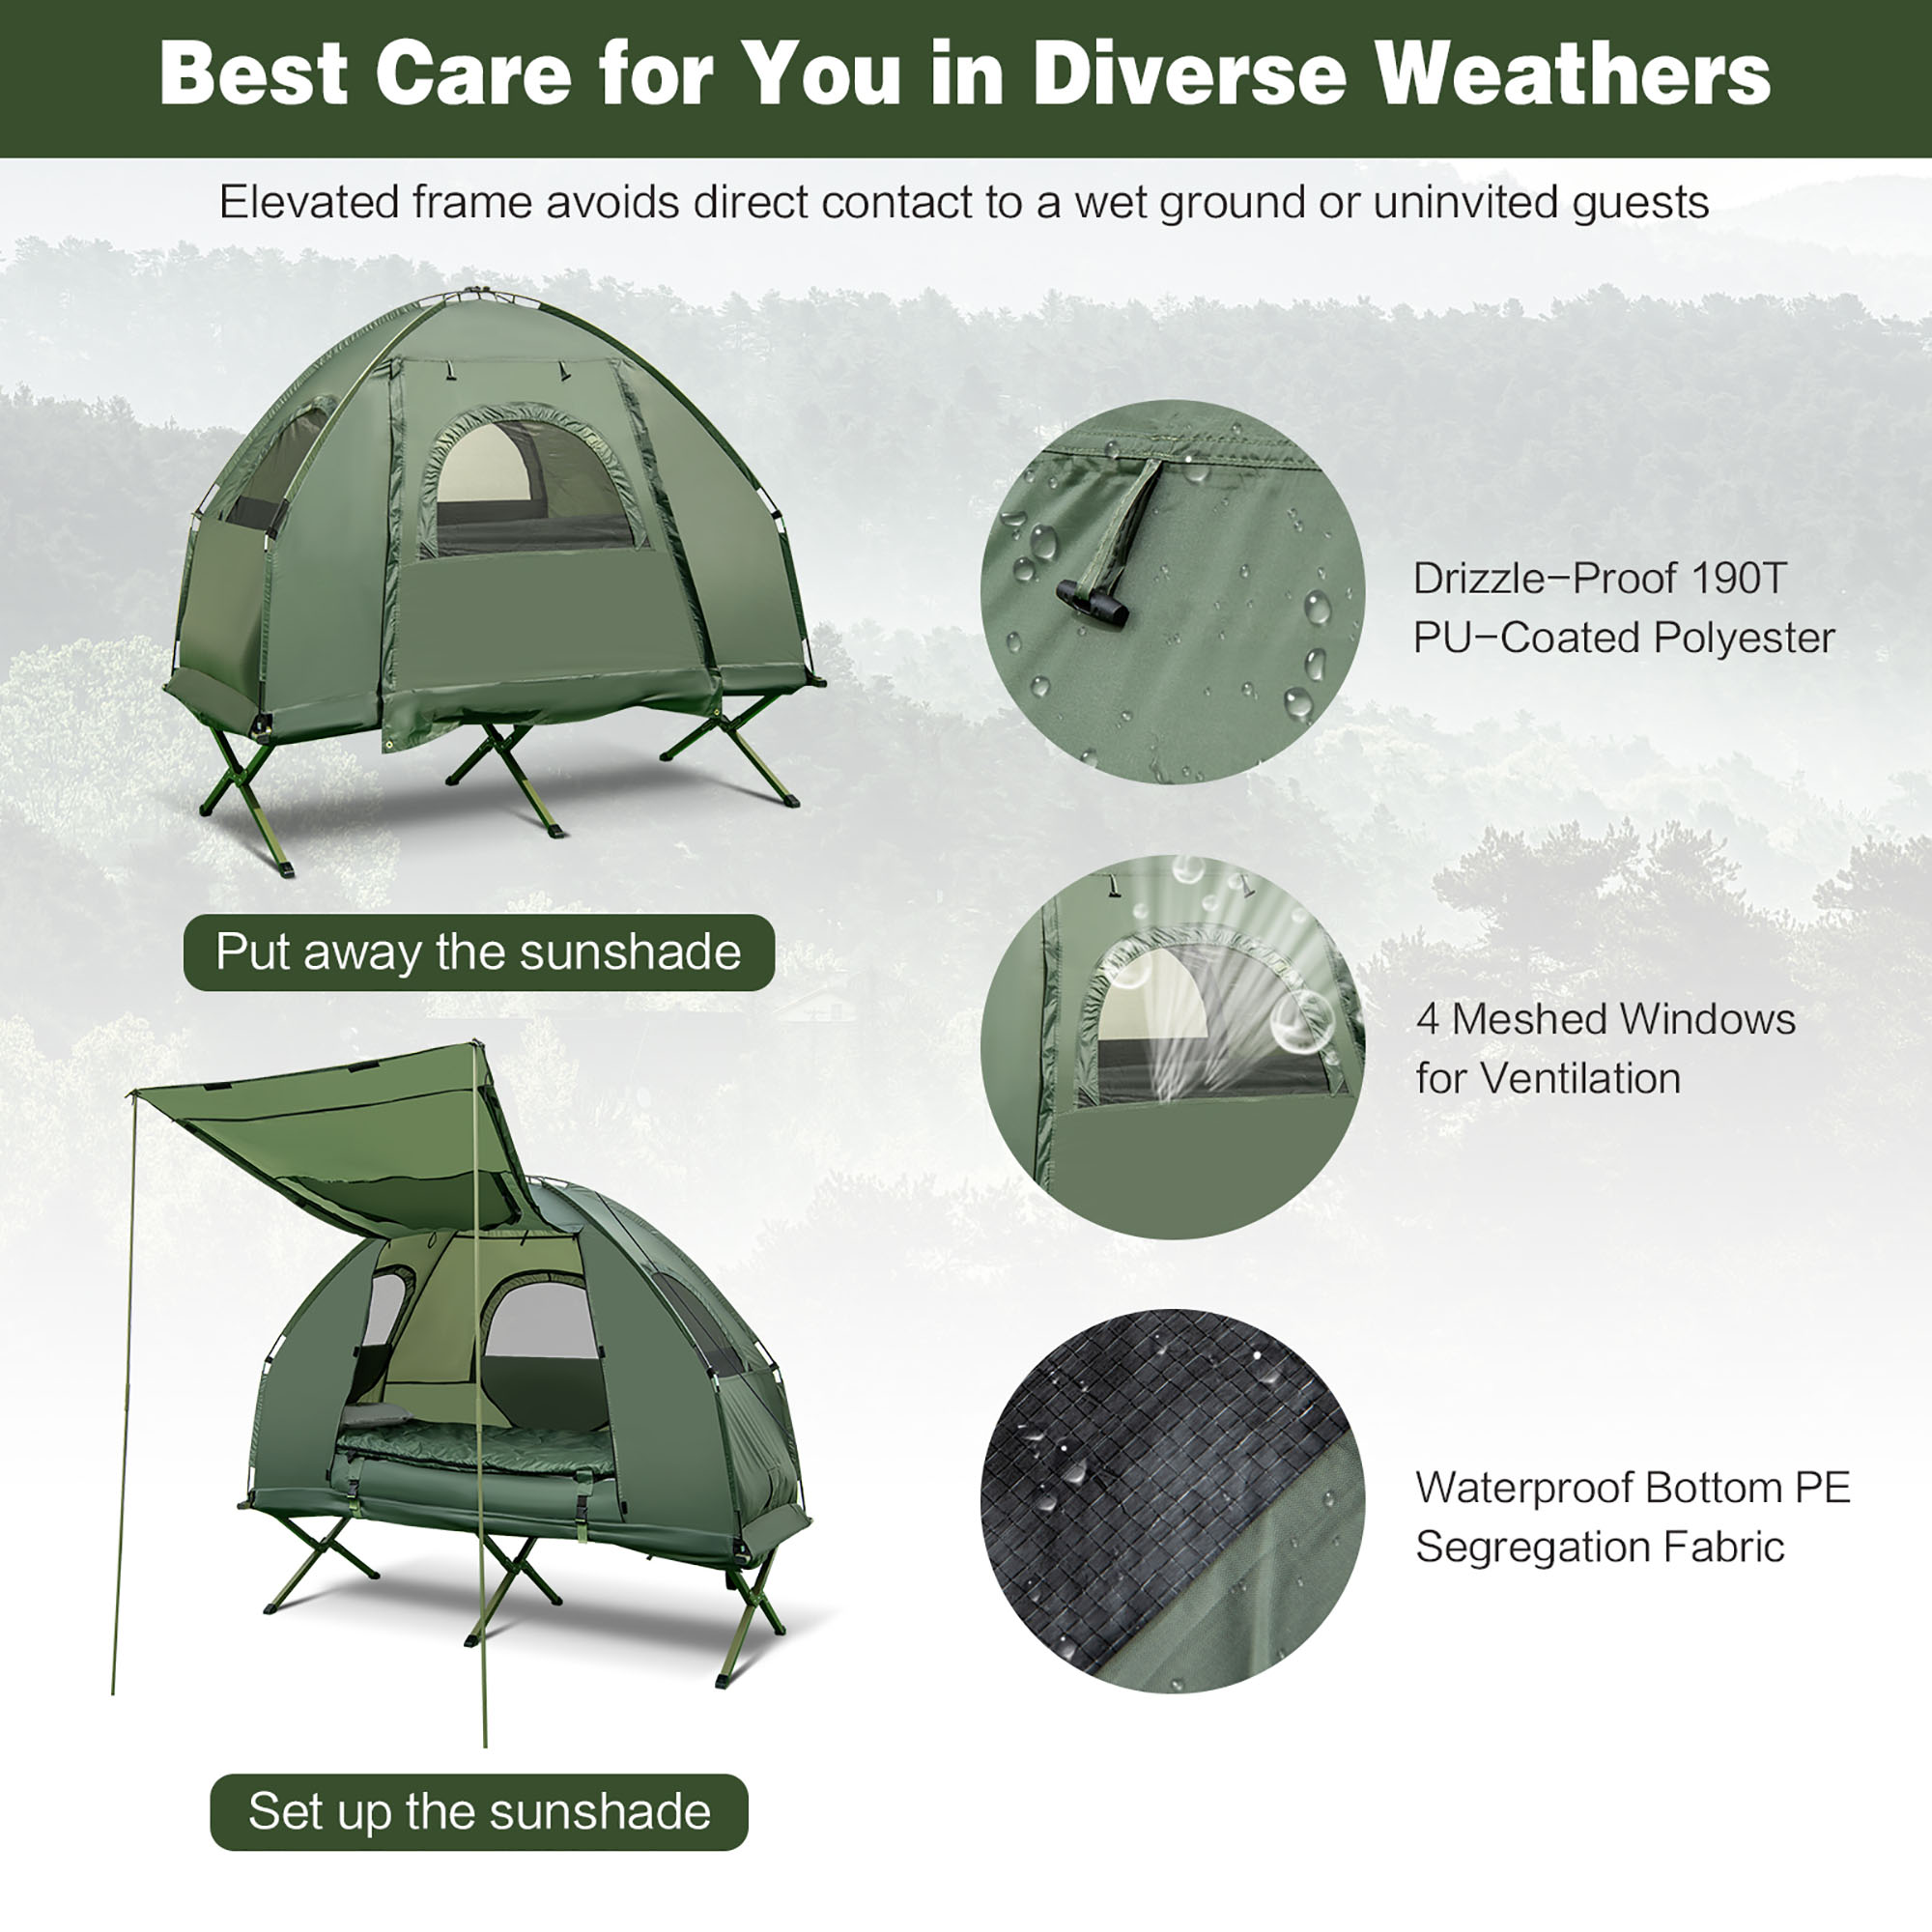 Costway Goplus 1-Person Compact Portable Pop-Up Tent/Camping Cot w/ Air Mattress & Sleeping Bag